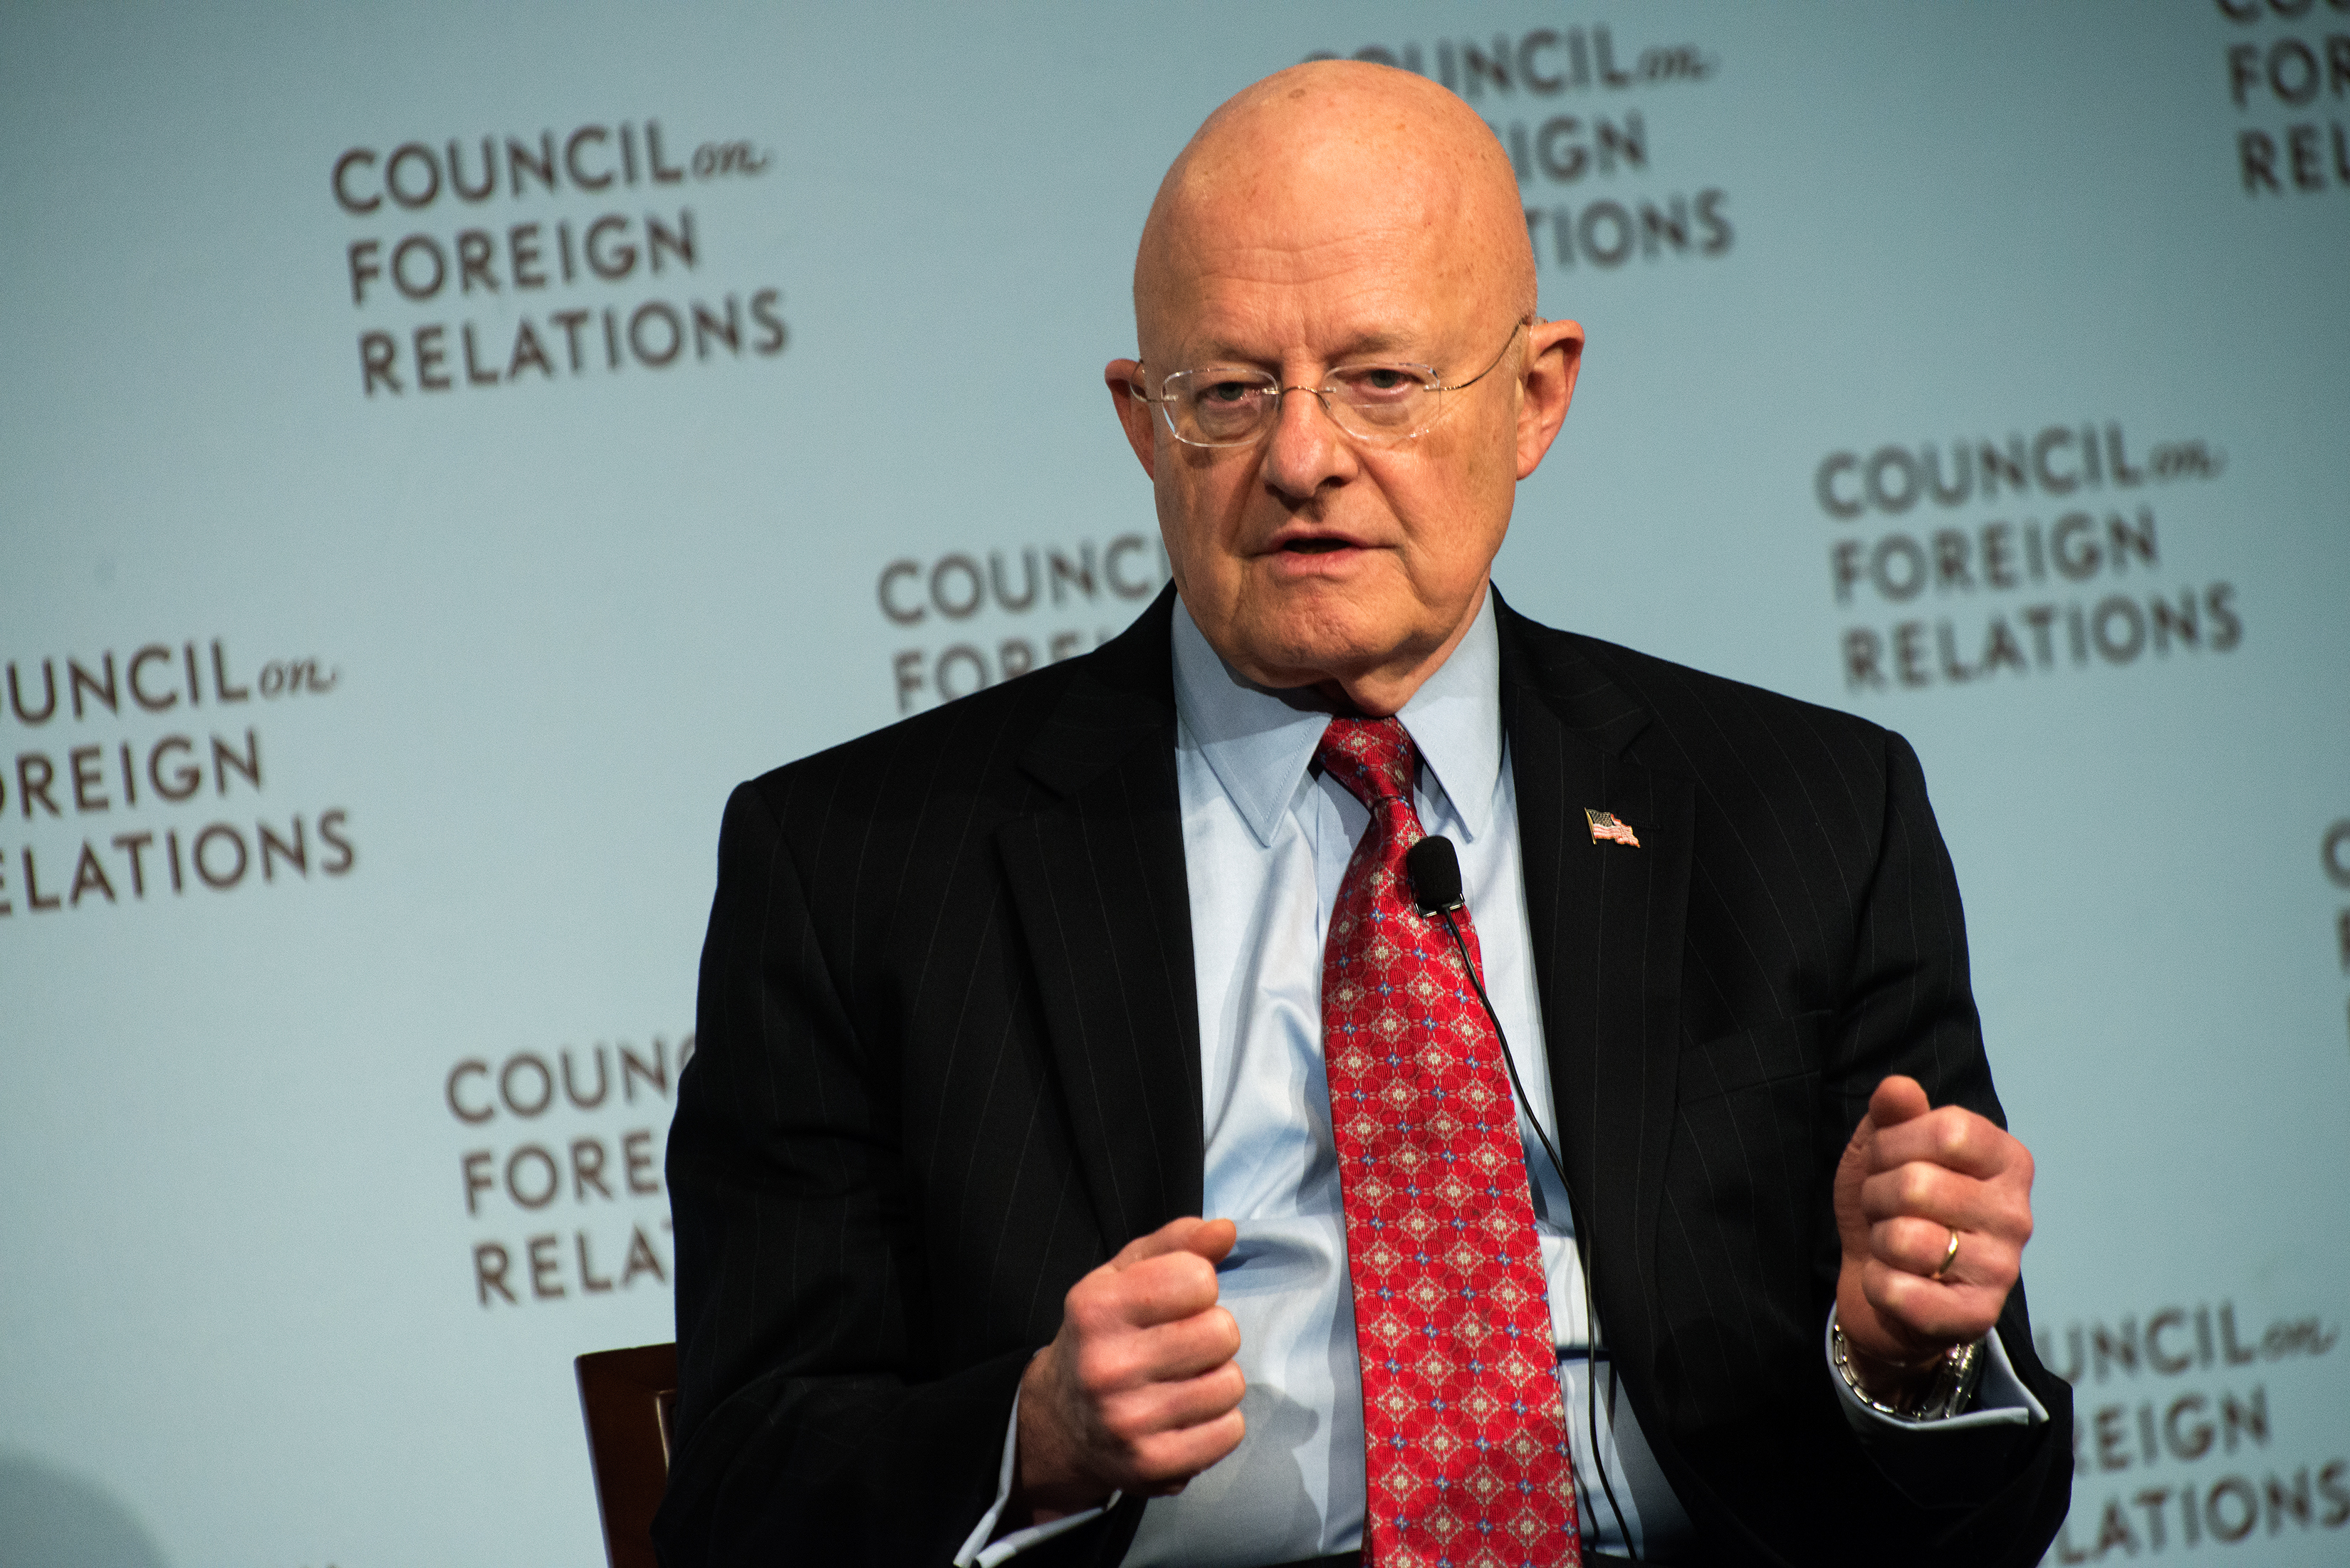 Director of National Intelligence James Clapper speaks at the Council on Foreign Relations on March 2, 2015 in New York City. (Bryan Thomas—Getty Images)